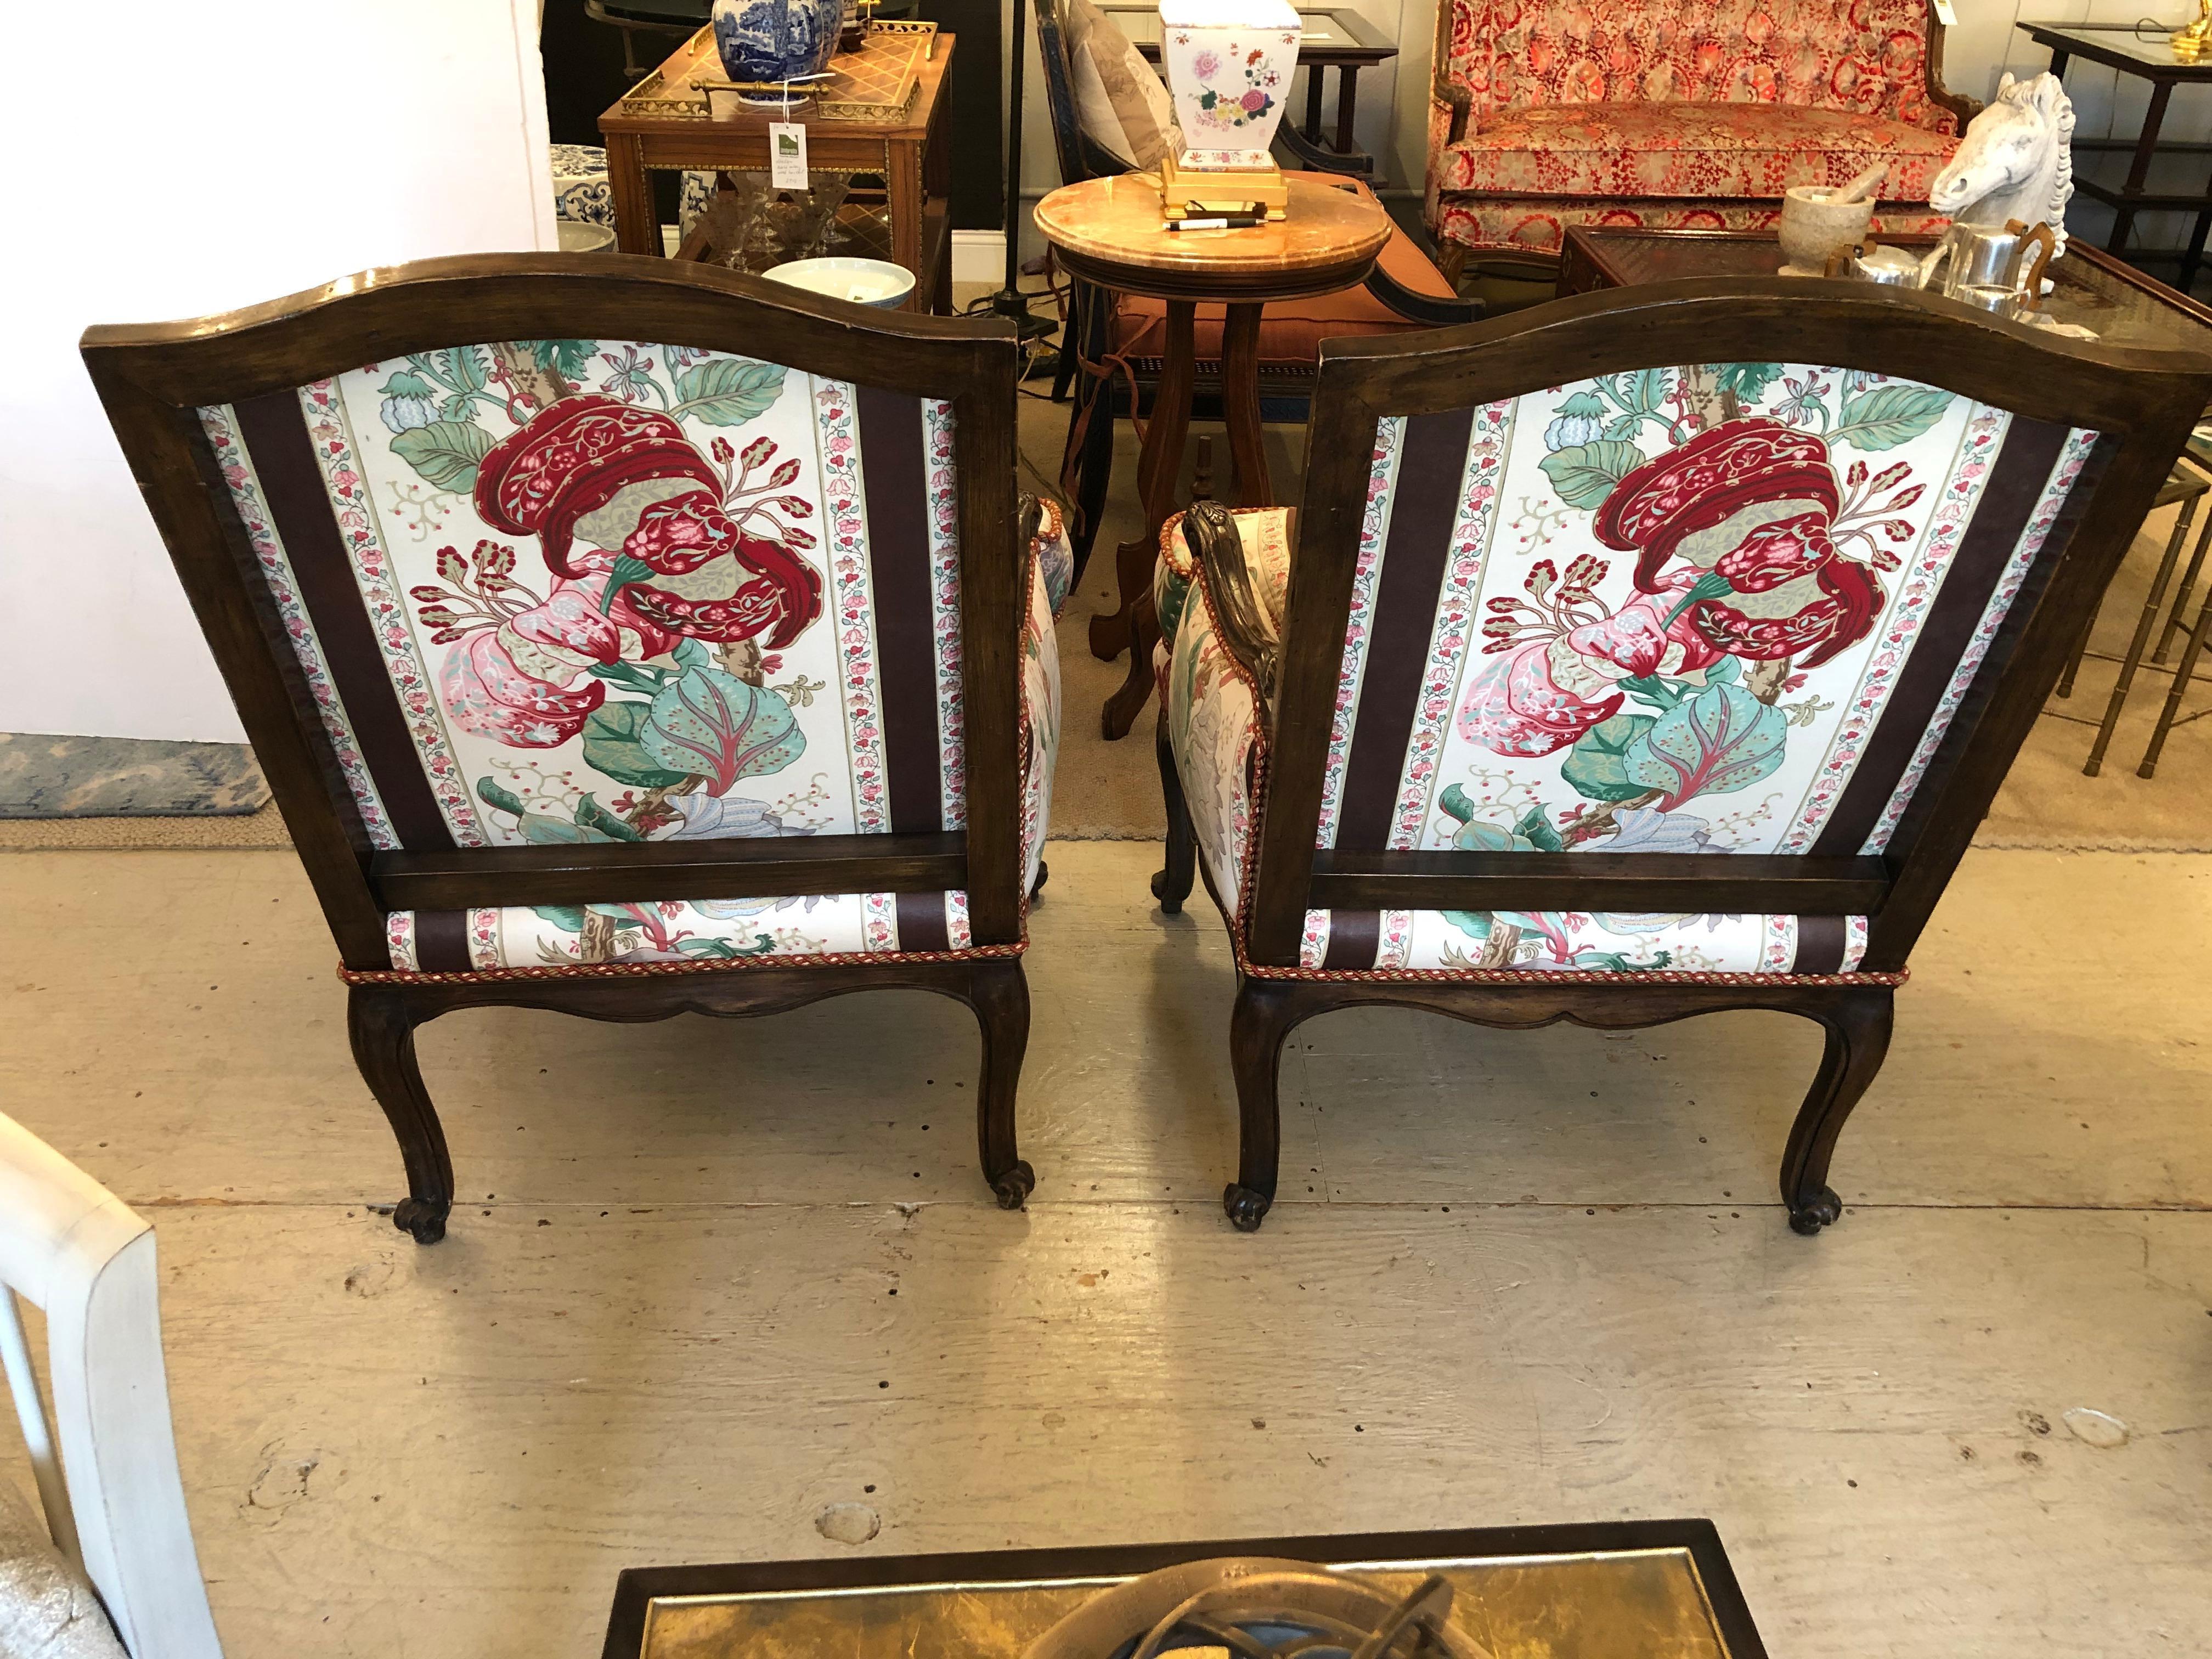 Superb luxurious pair of antique carved walnut and chintz upholstered bergeres that ooze quality. The upholstery on these large club chairs is embellished with coordinating maroon rope trim and the seats are cloud like and down filled. Unbelieveably